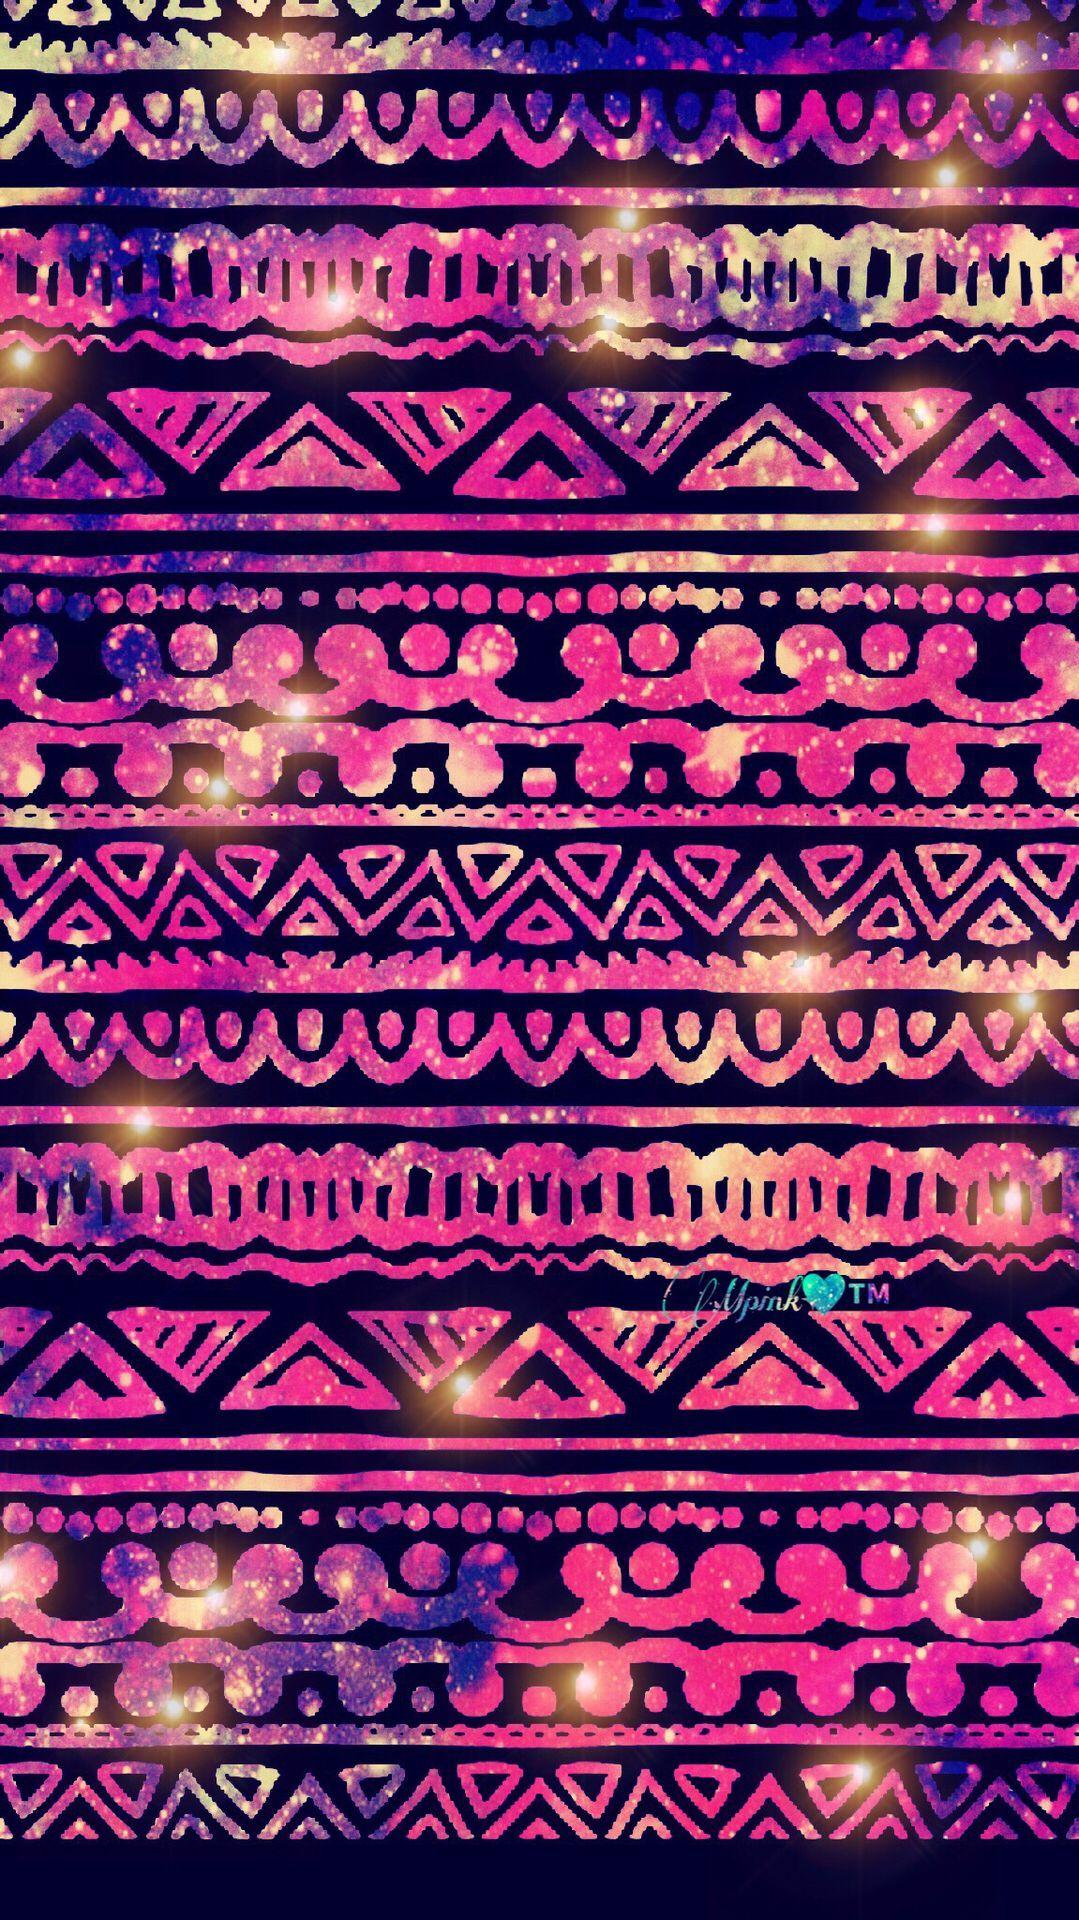 Bling Tribal Background Galaxy Wallpaper #androidwallpaper